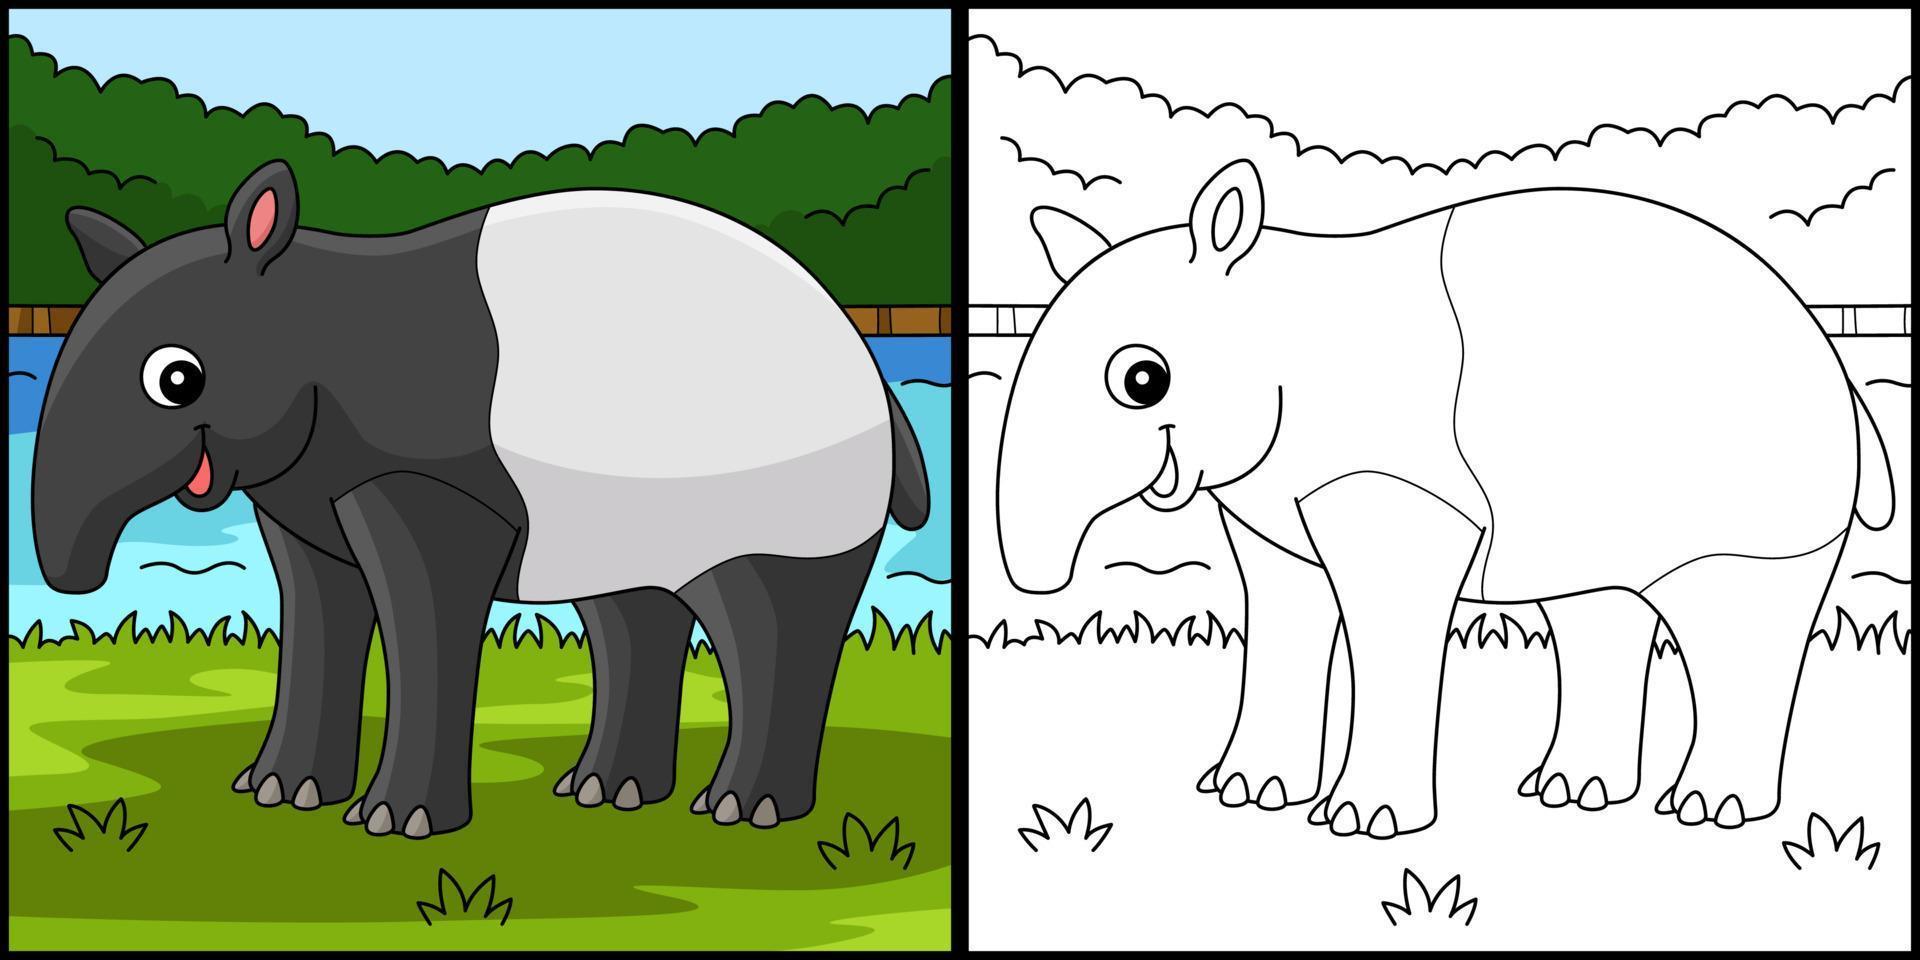 Tapir Animal Coloring Page Colored Illustration vector